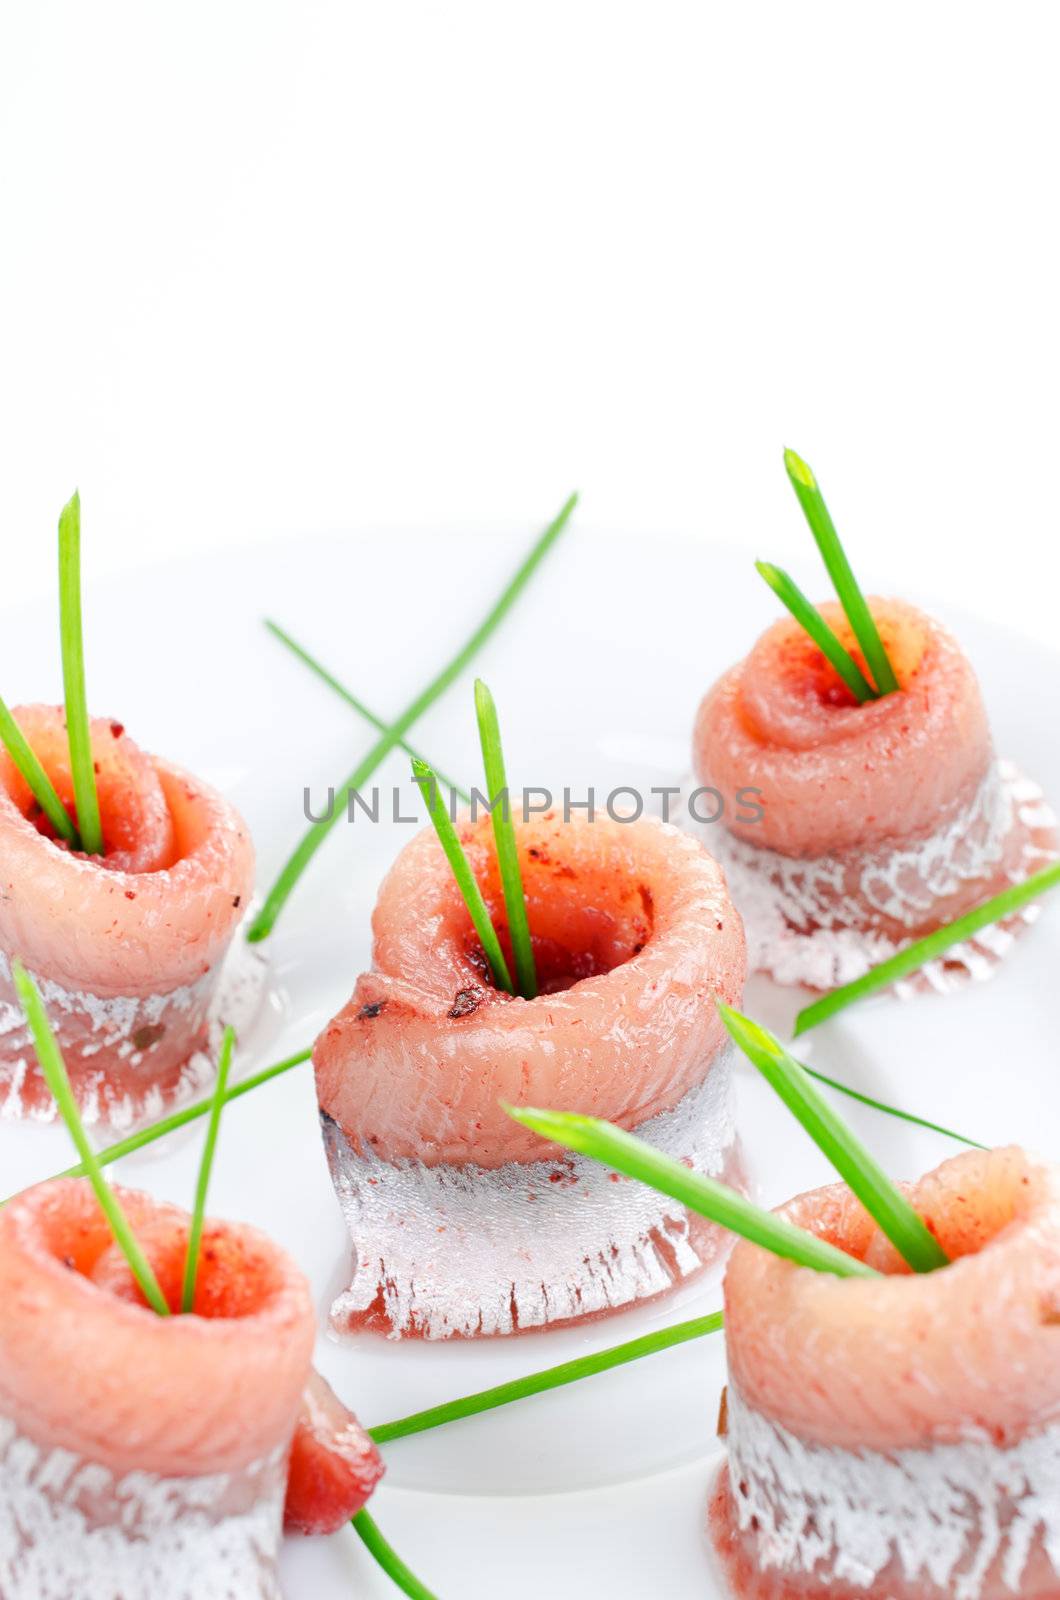 Rolls of marinated herring close up with spring onion on a plate